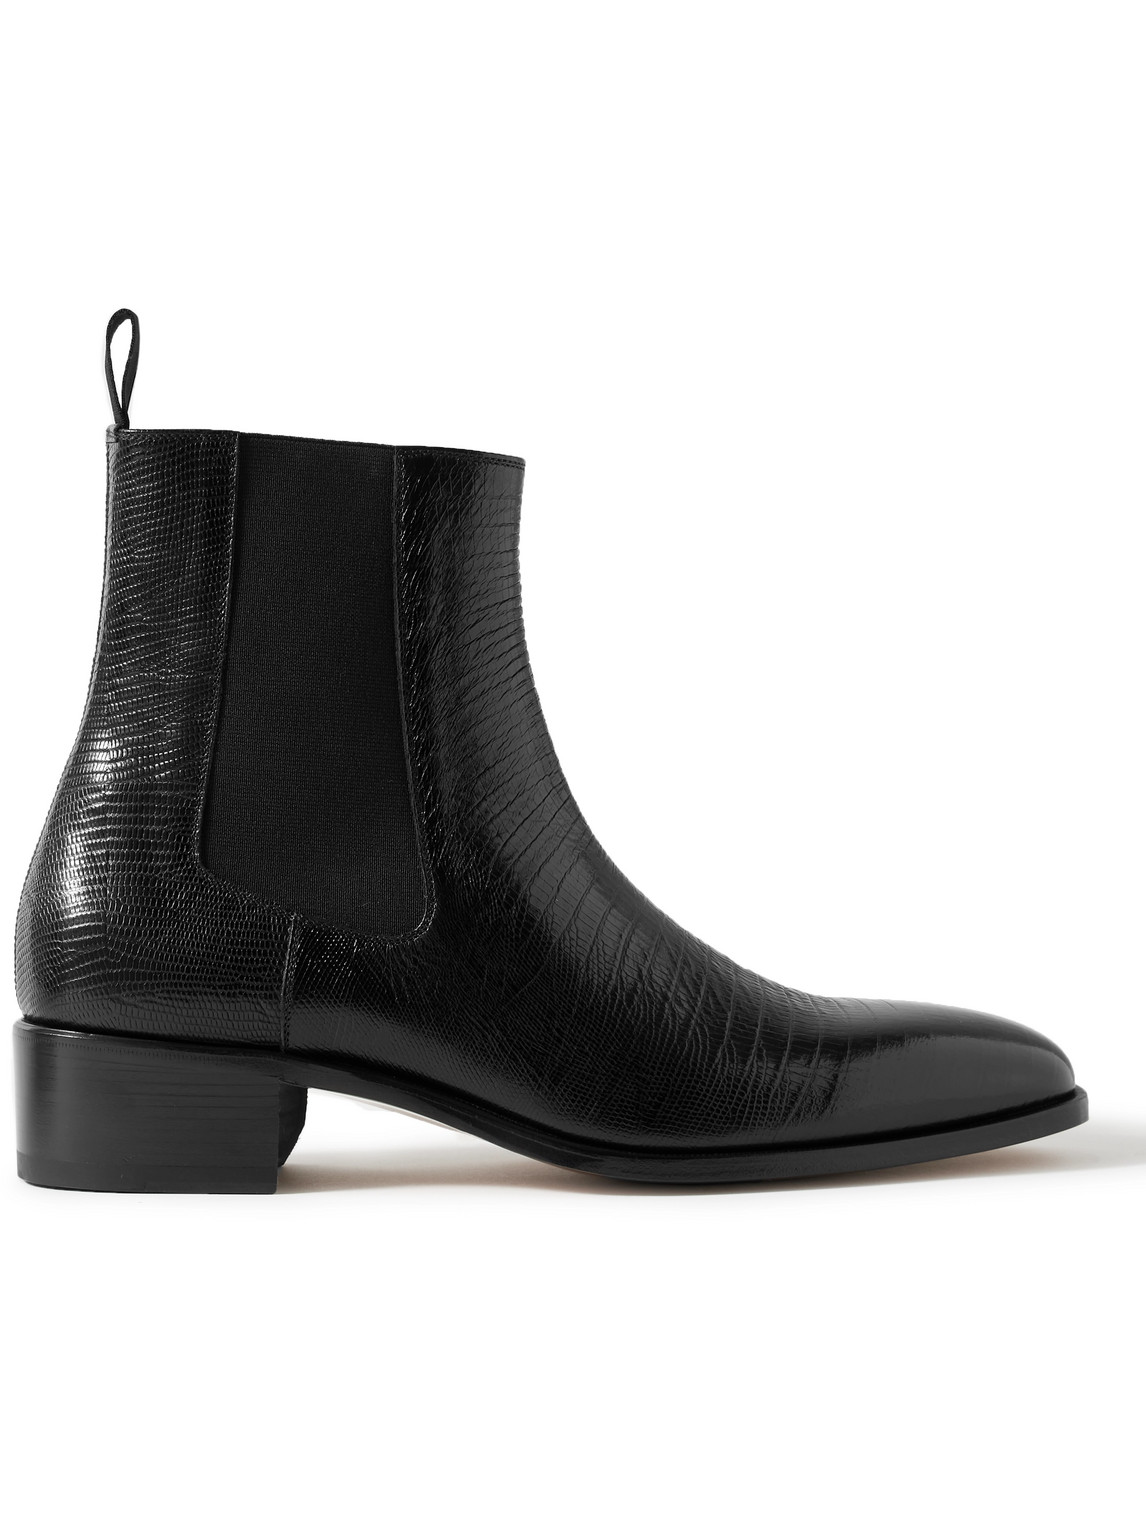 TOM FORD ALEC CROC-EFFECT LEATHER CHELSEA BOOTS